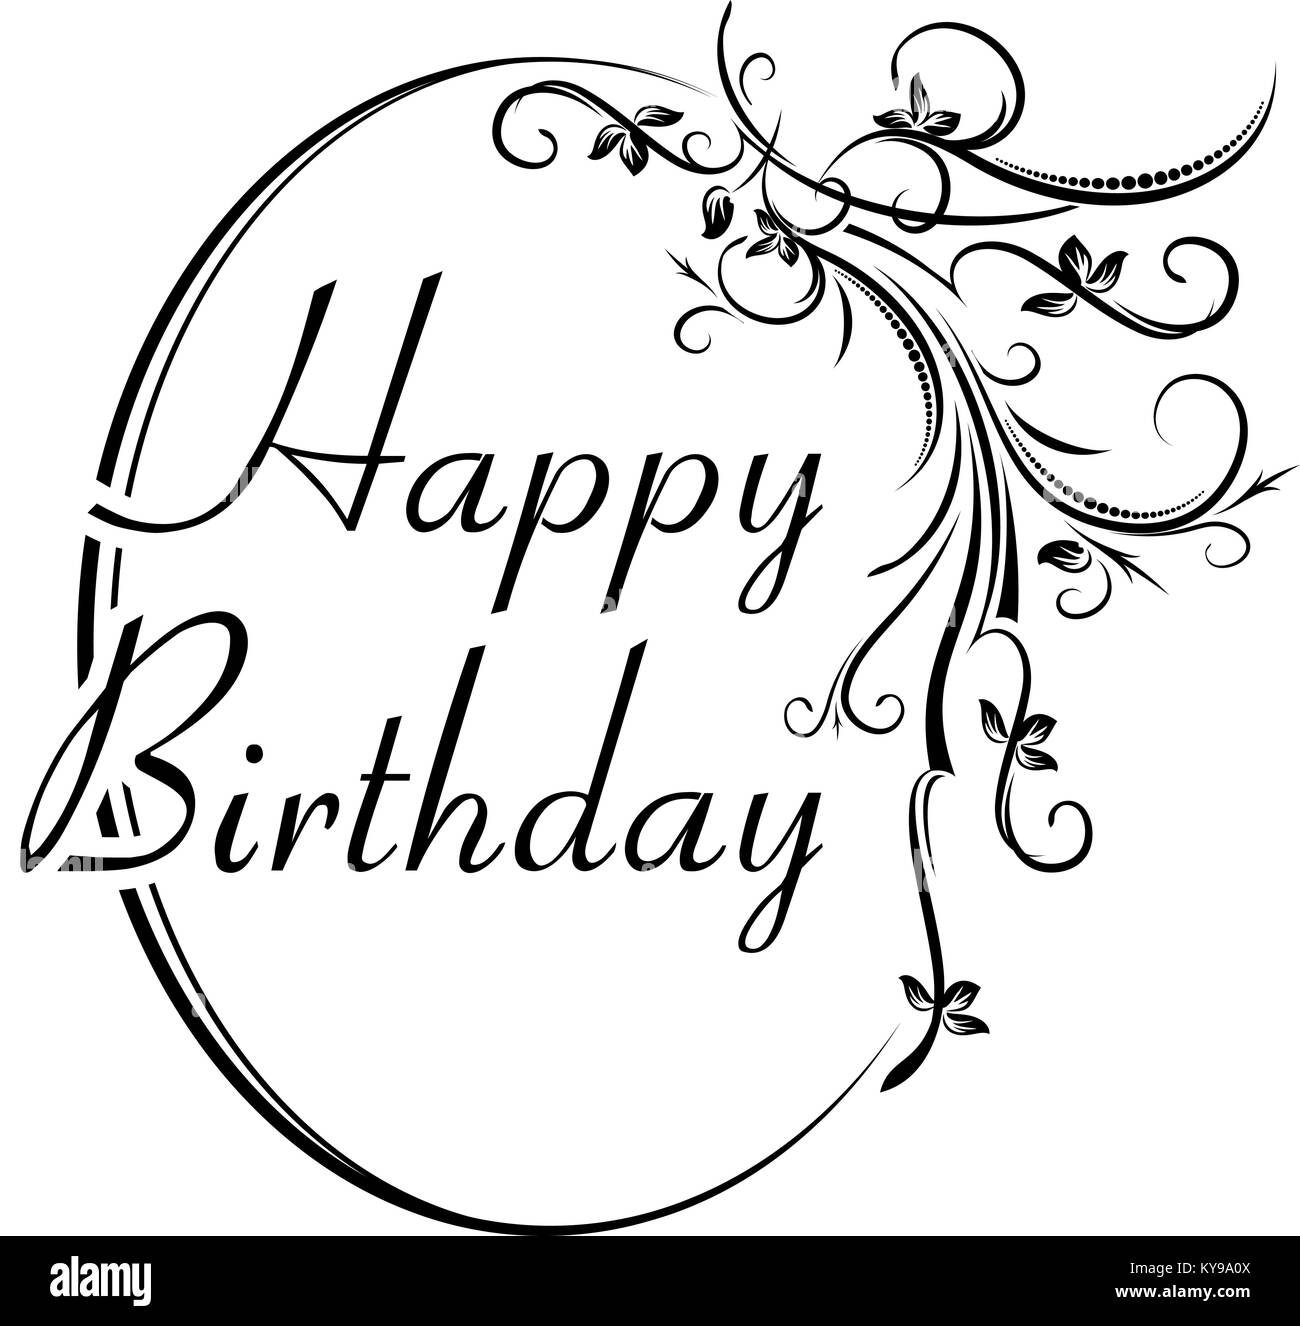 Cupcake Topper/Picks 12 "Happy Birthday Wishes" Double Sided Black/White